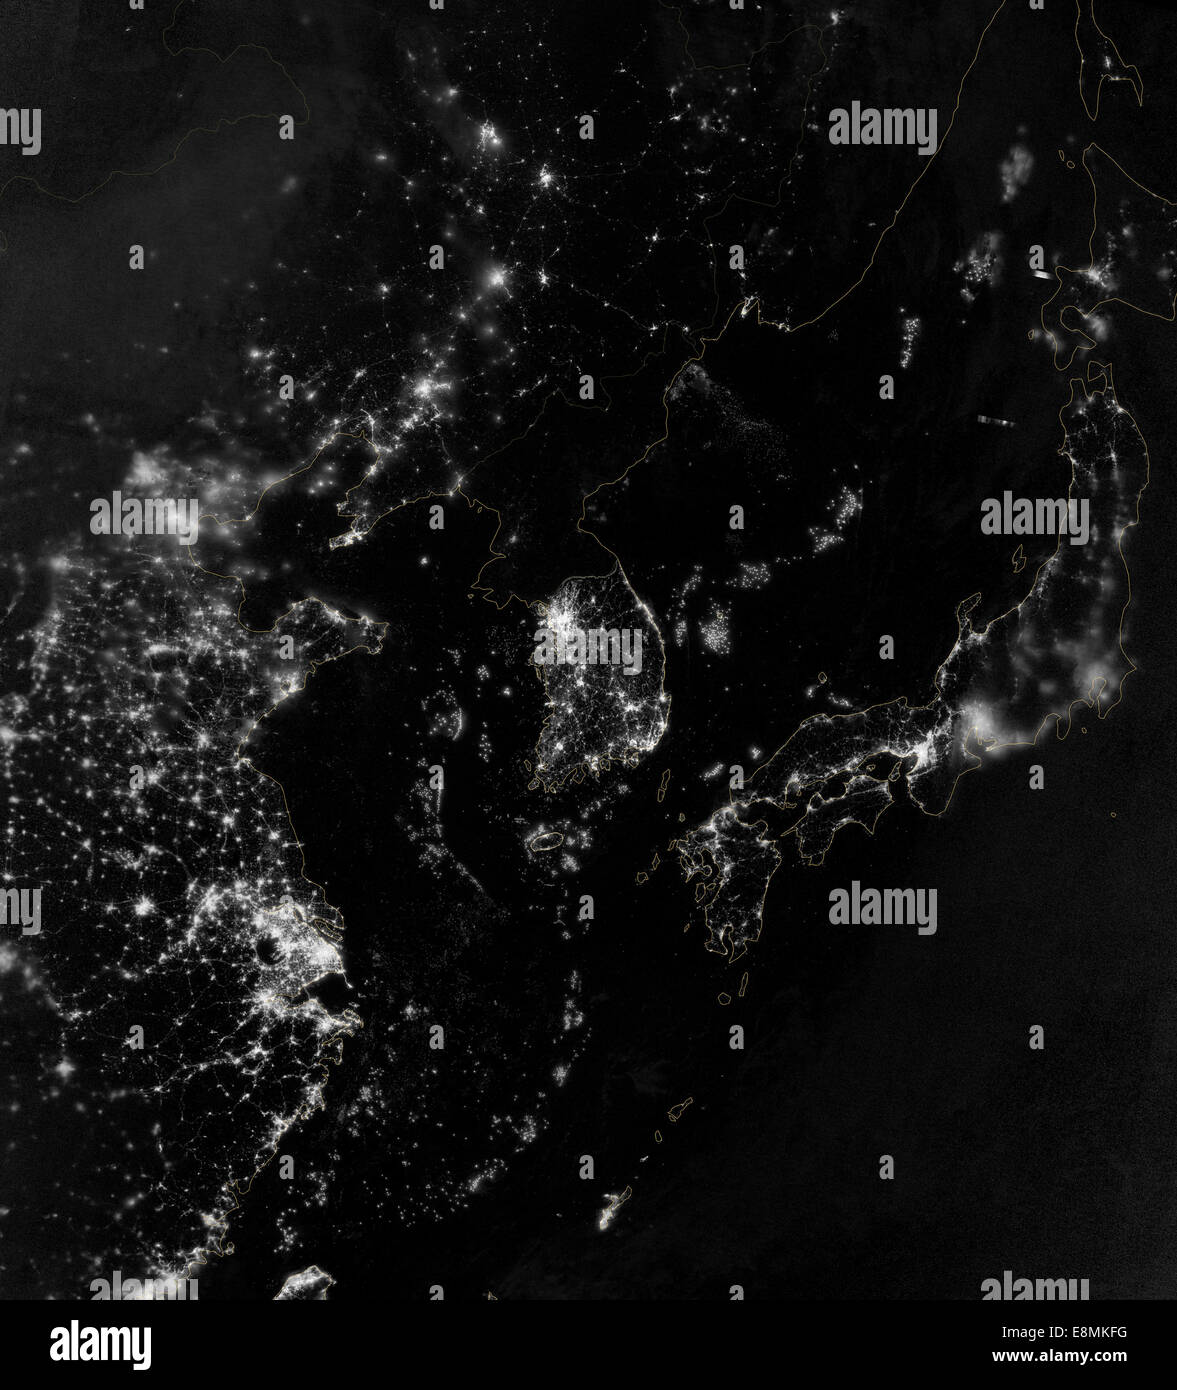 September 24, 2012 - Satellite view of the Korean Peninsula showing city lights at night. Also visible are parts of China and Ja Stock Photo